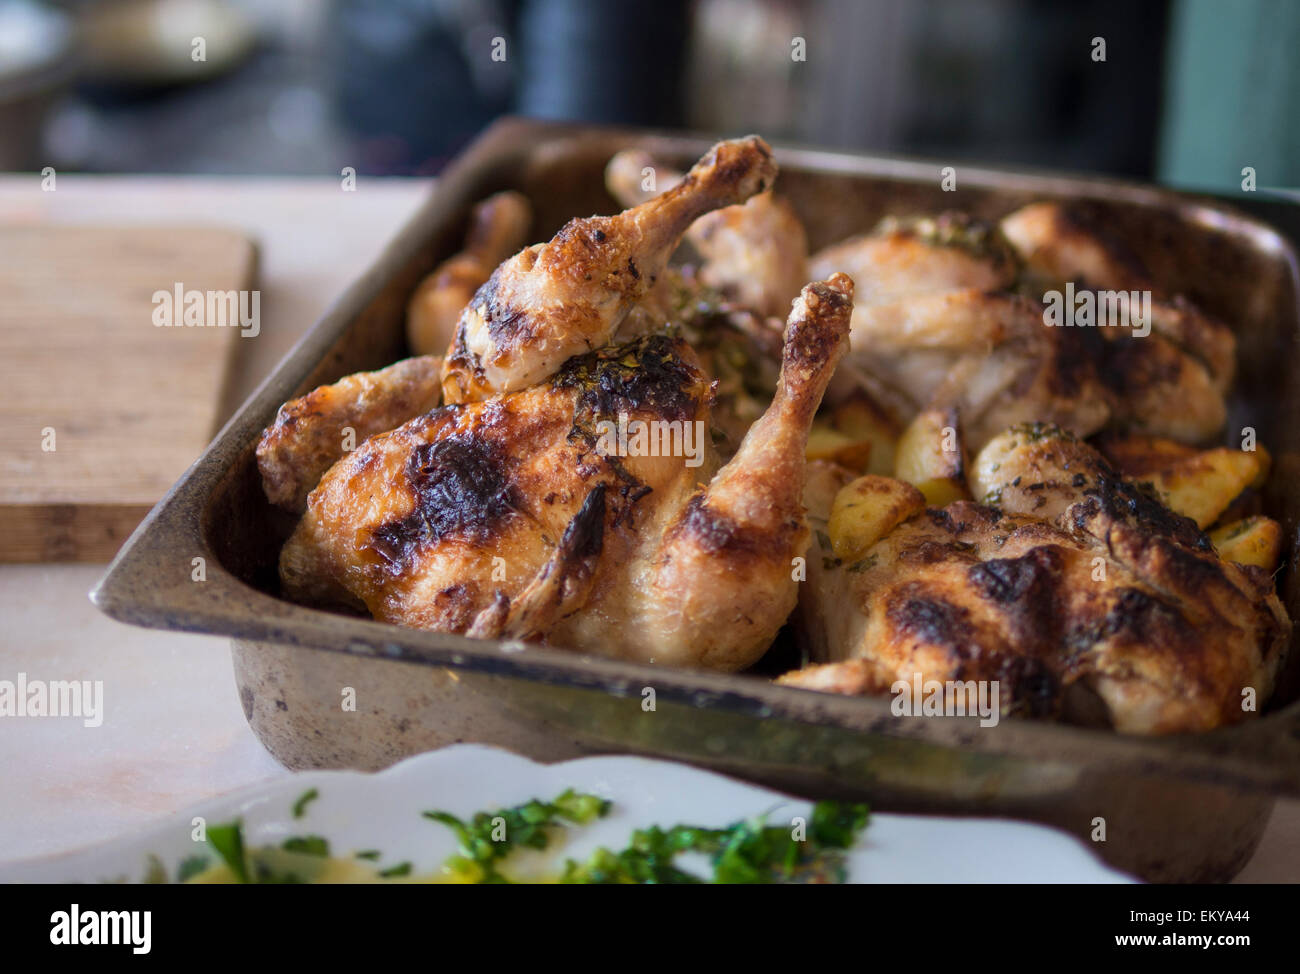 Grilled whole organic chicken Stock Photo by ©NatashaBreen 148740225